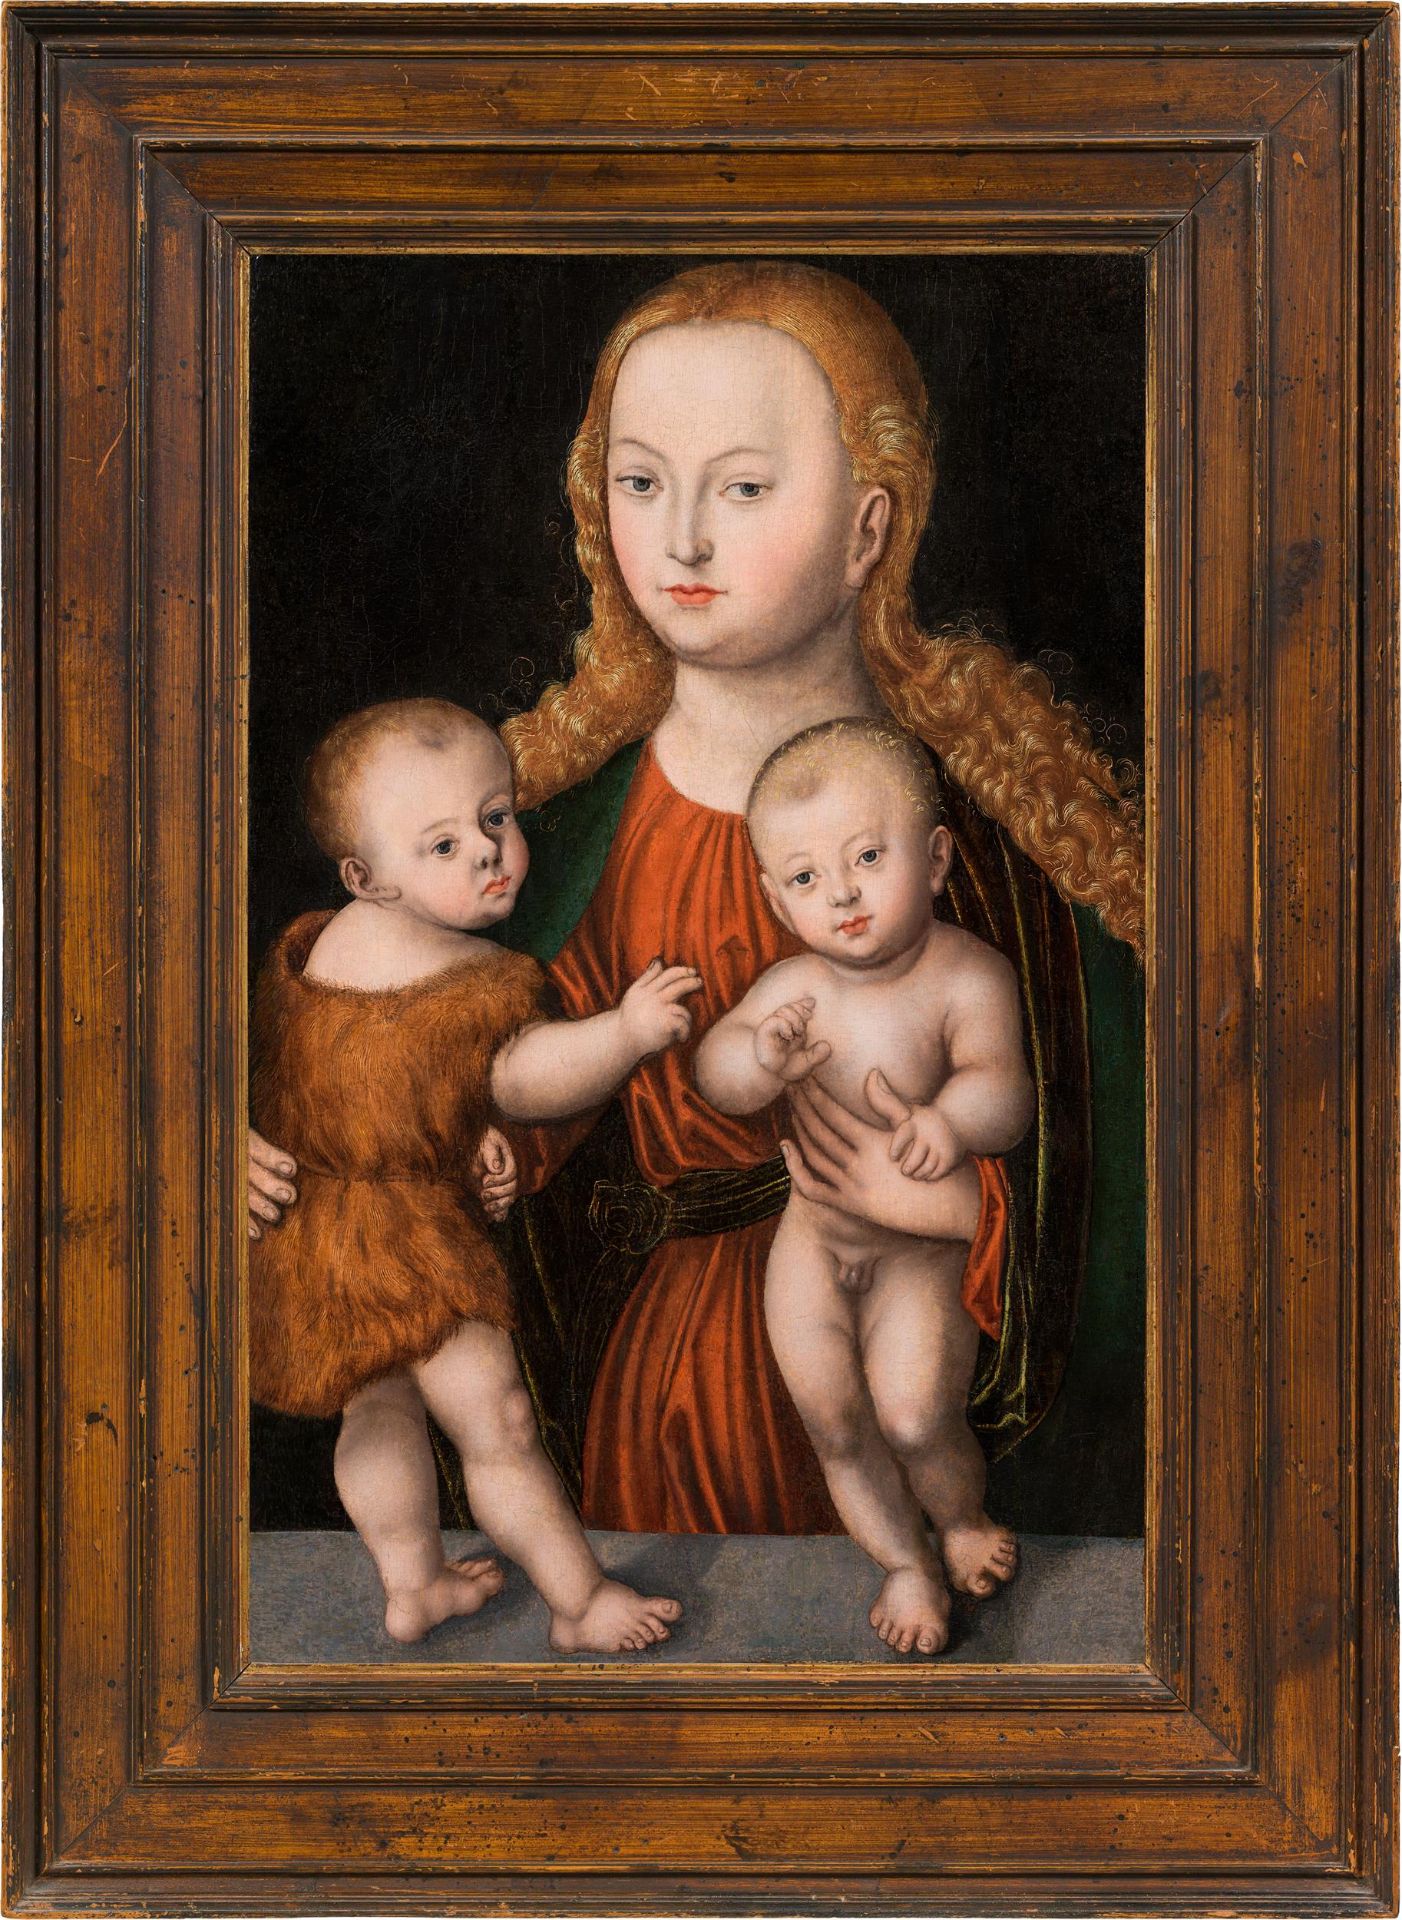 Studio of Lucas Cranach the Elder : The Virgin and Child with the Infant Saint John - Image 2 of 2